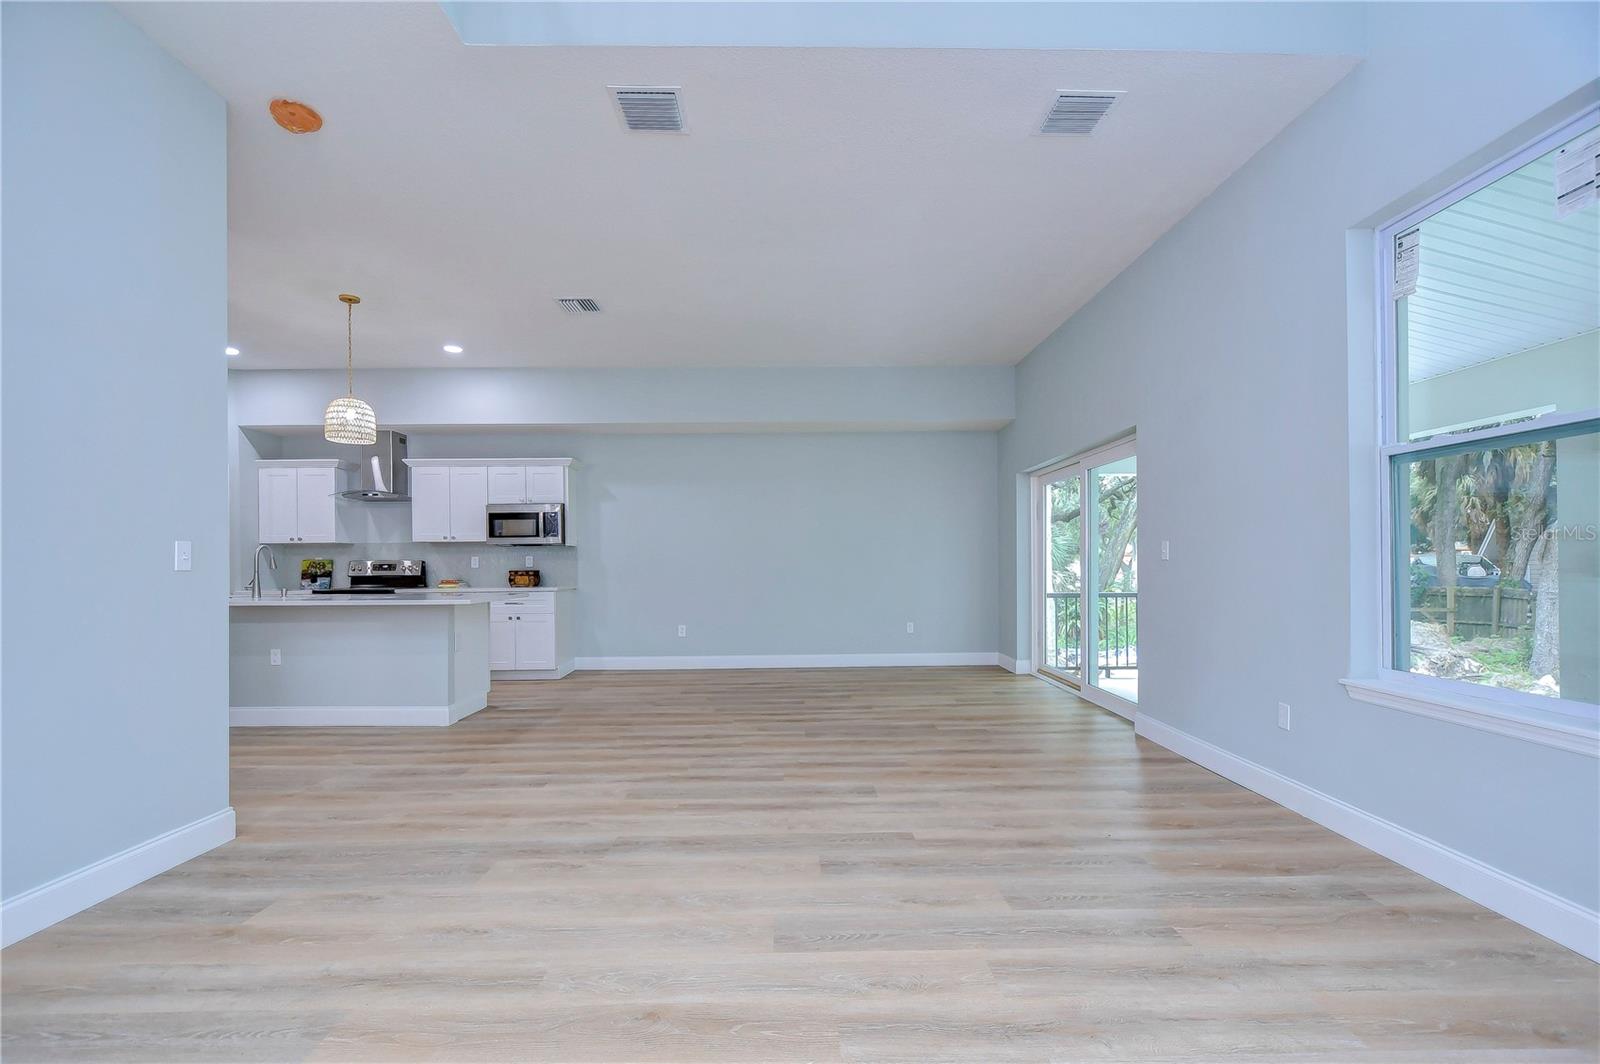 Natural light fills the downstairs and the blond floors add a sense of spaciousness.